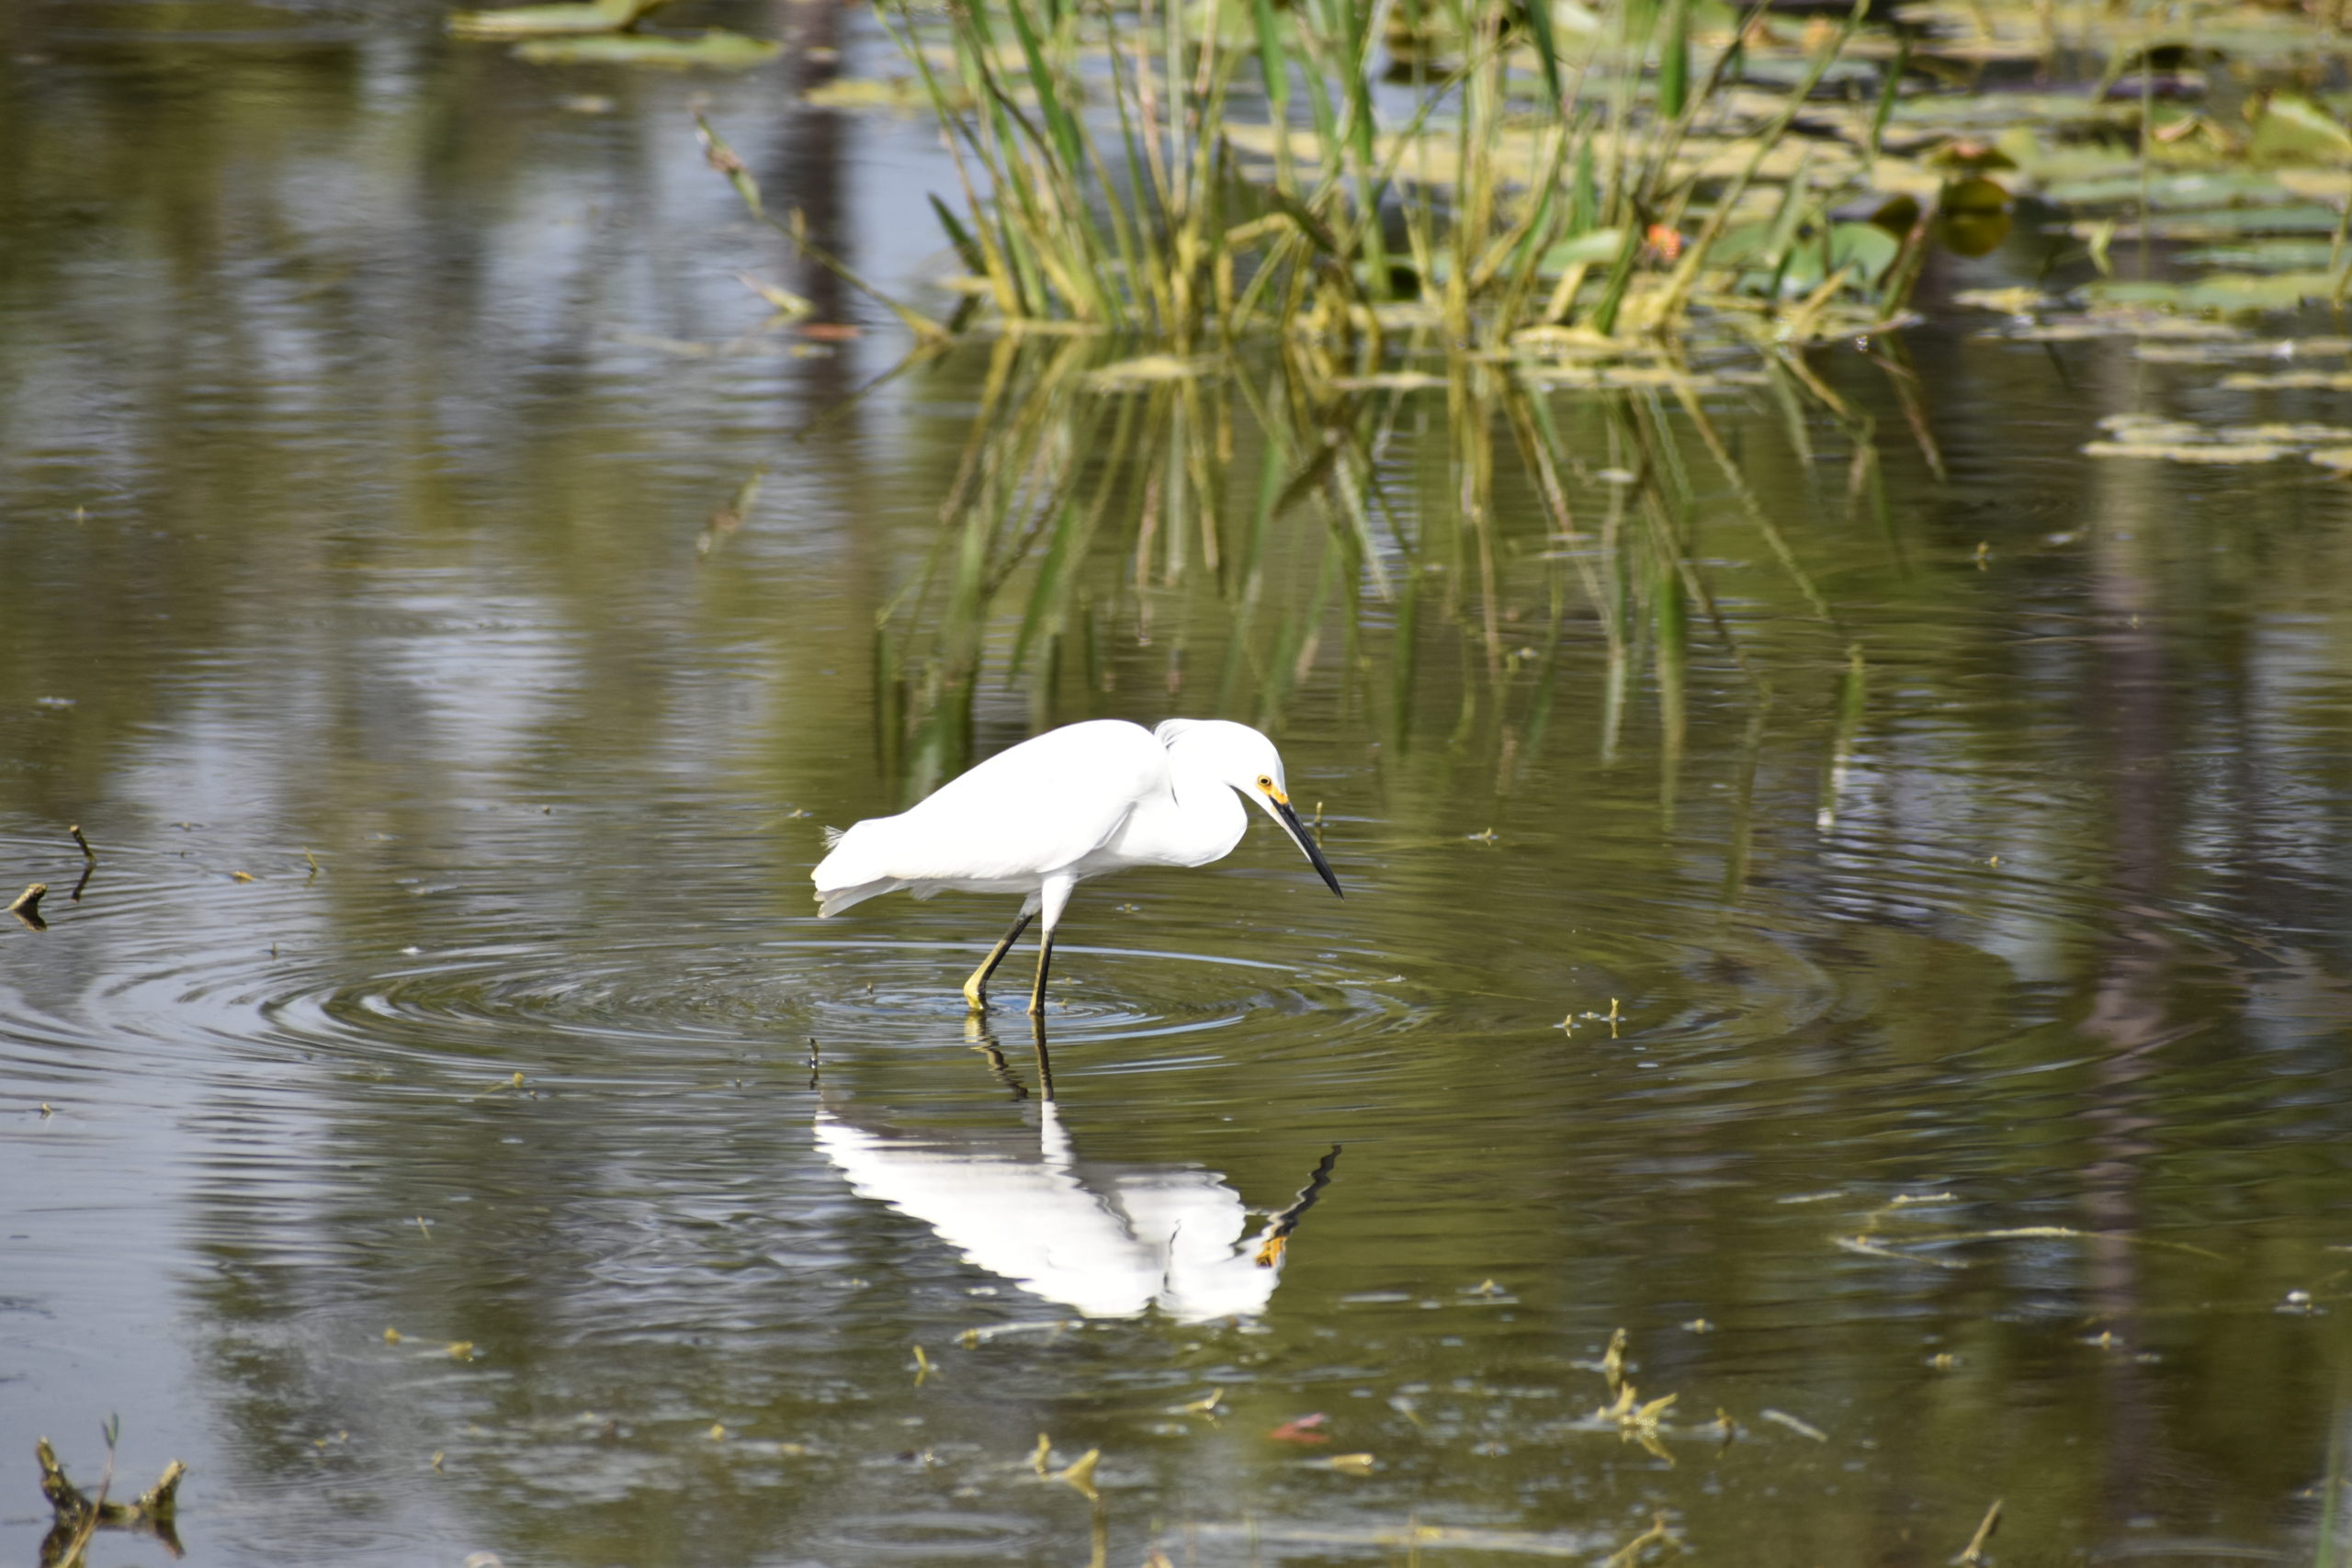 Ibis on the water